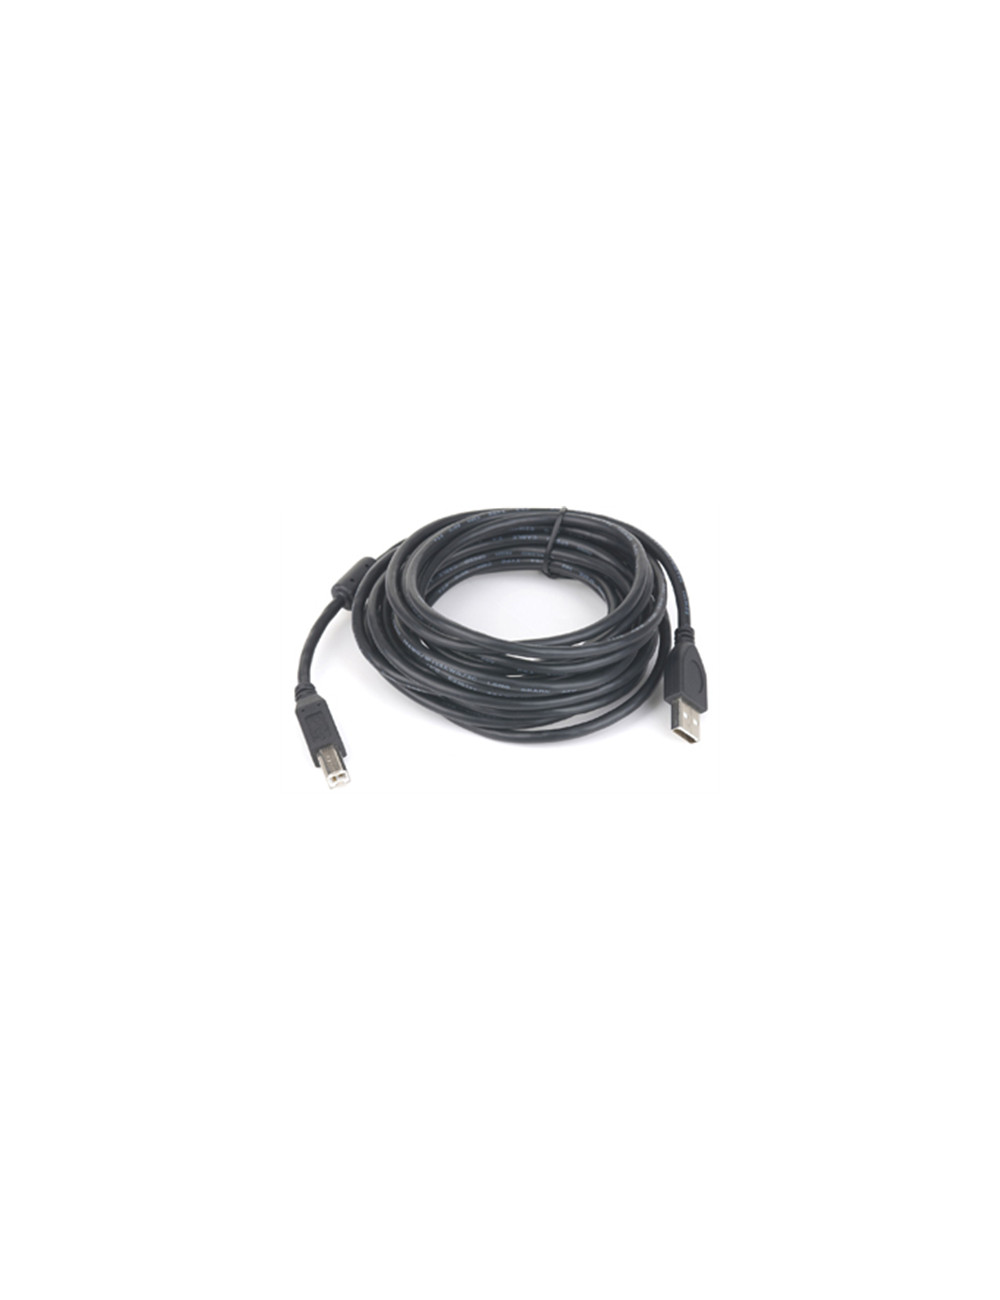 USB 2.0 A-plug B-plug 3 m (10 ft) cable with ferrite core Gembird